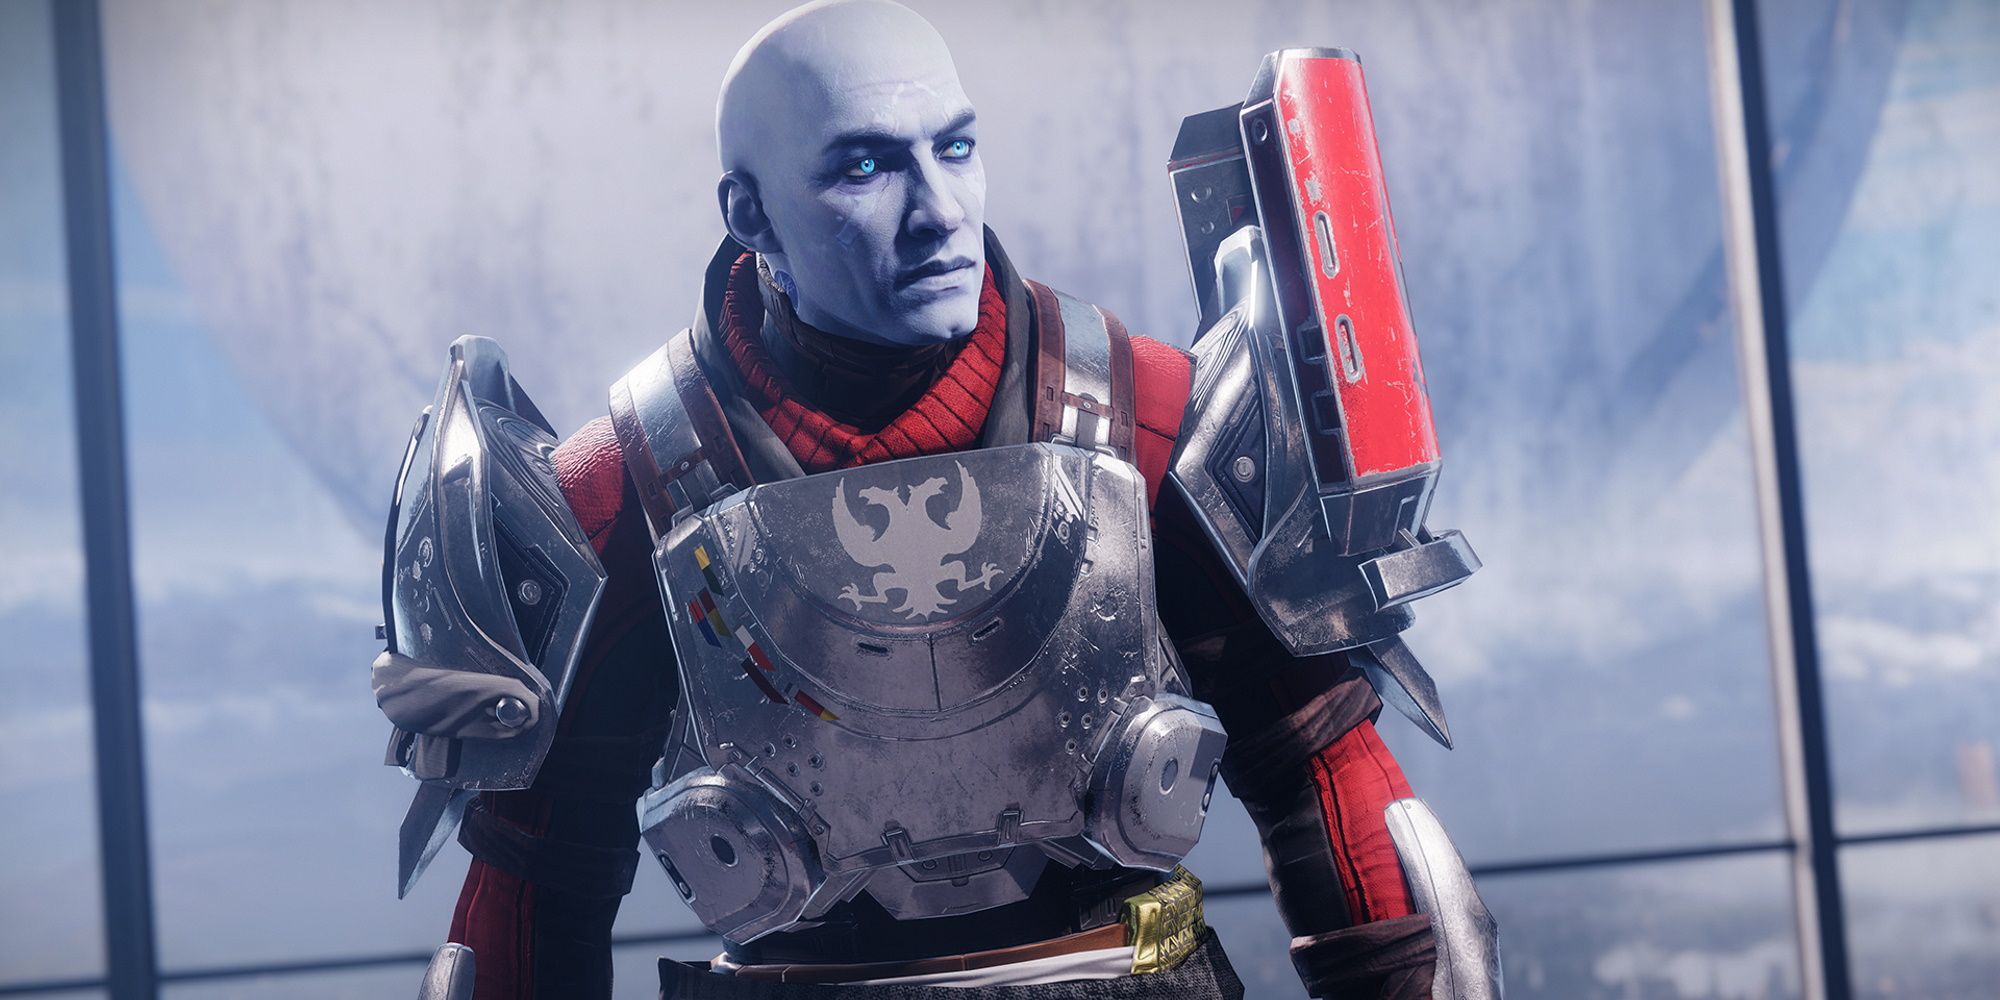 Destiny 2 To Revamp Reputation Gains In Witch Queen And Bring Back Two Nightfall Weapons